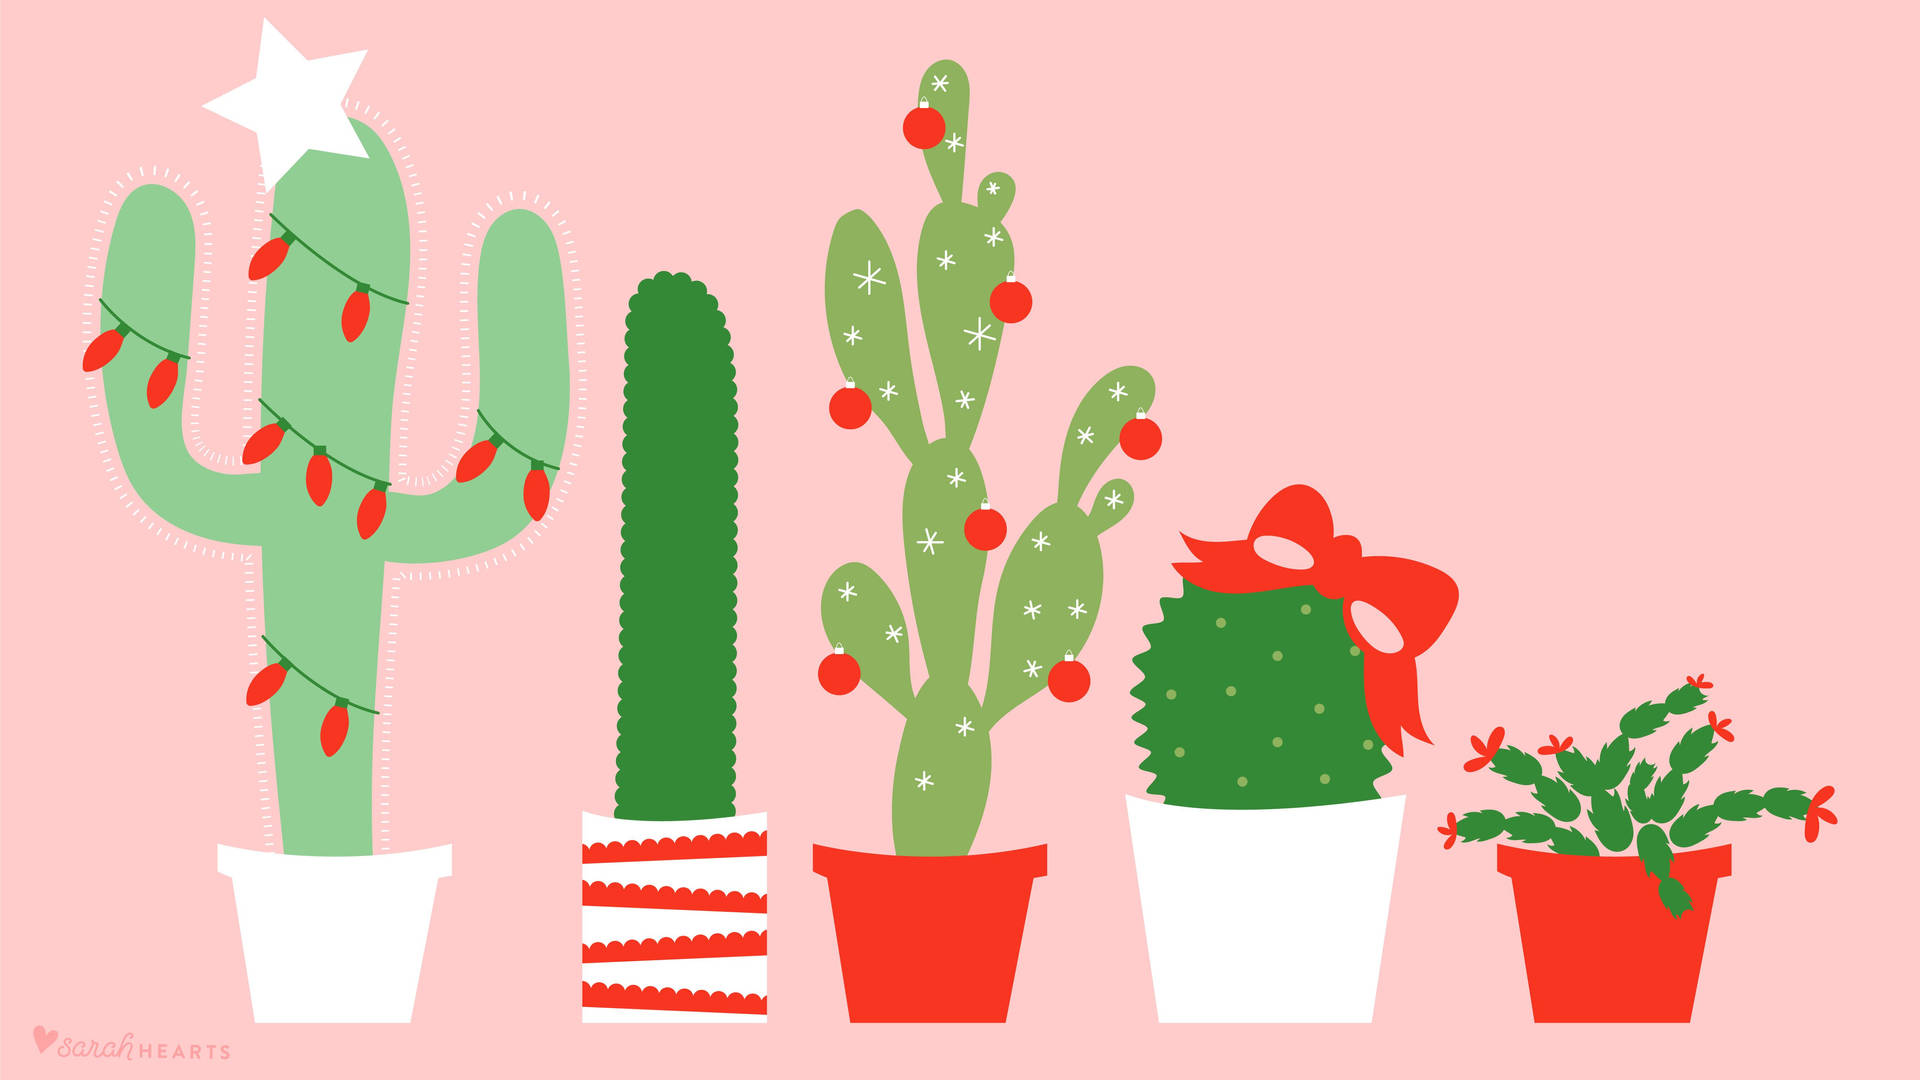 Celebrate the Holidays with this Festive Cactus Wallpaper